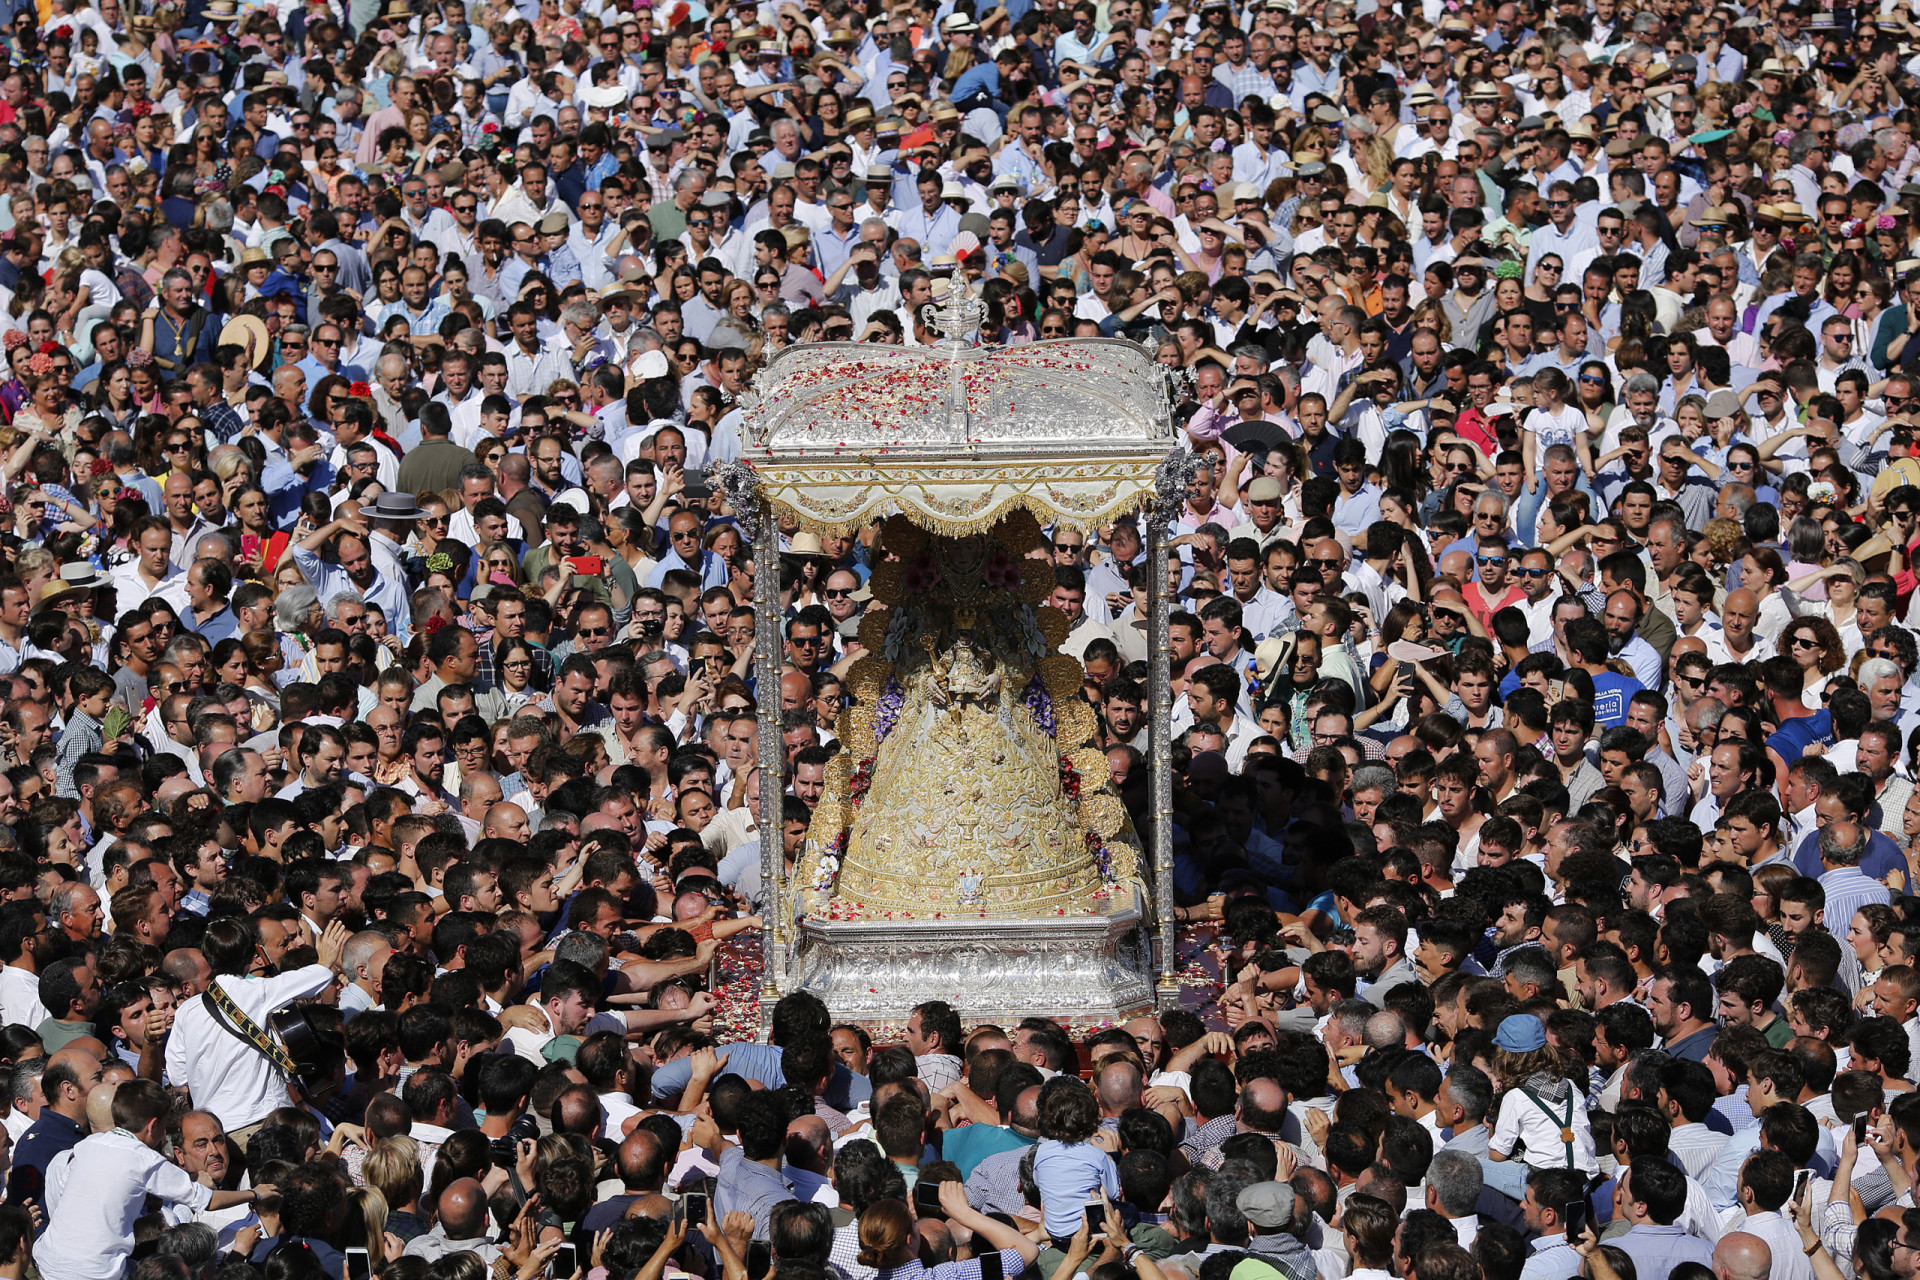 <p>The pilgrimage of Rocio is one of the largest Roman Catholic pilgrimages in Europe. It's also one of the most colorful pilgrimages, providing insight into the unique culture of Andalusia.</p><p>You may also like:<a href="https://www.starsinsider.com/n/430902?utm_source=msn.com&utm_medium=display&utm_campaign=referral_description&utm_content=524487en-us"> 30 signs that you may have heart trouble</a></p>